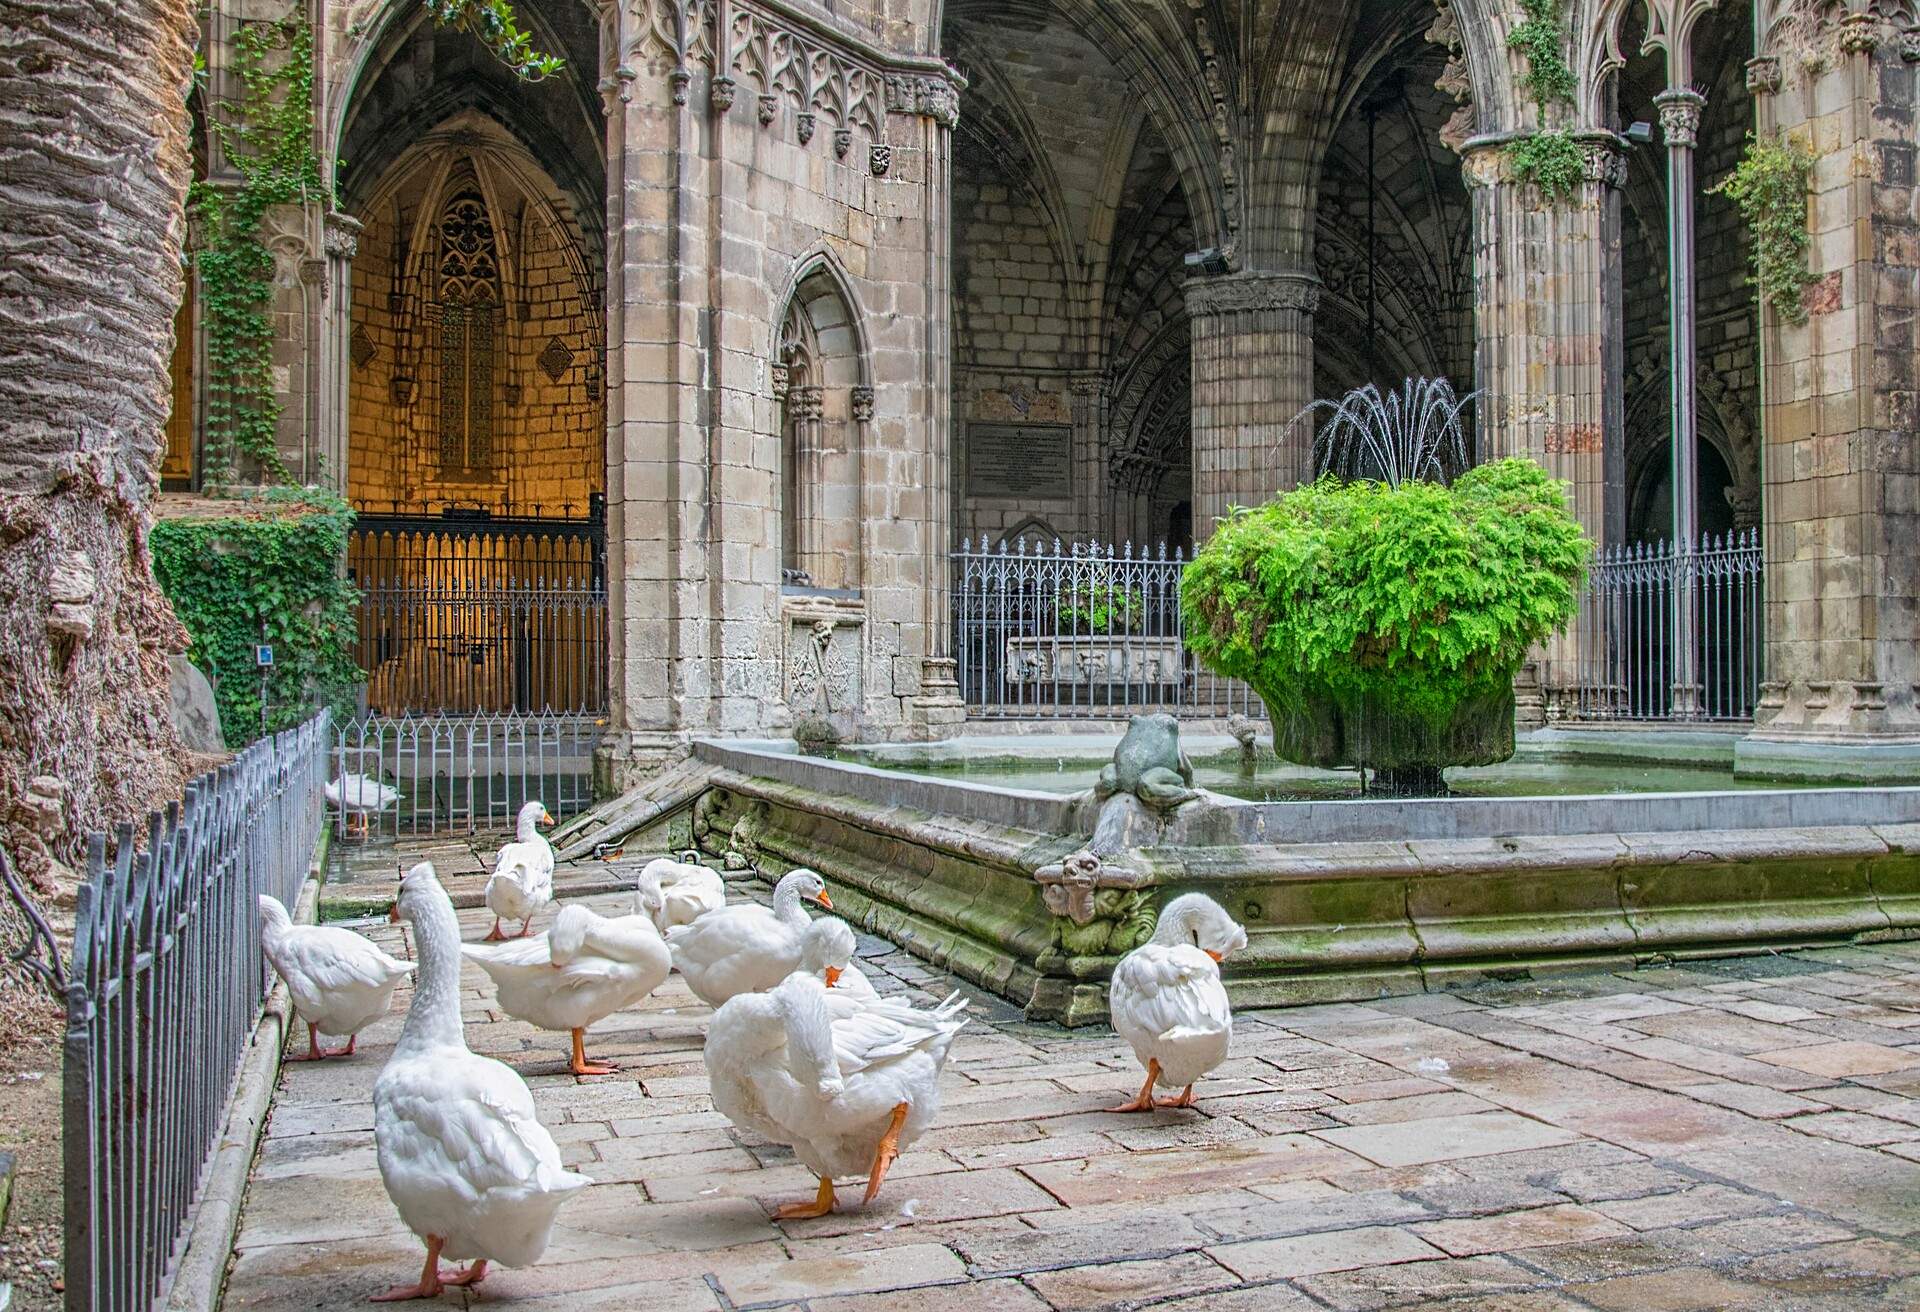 The Gothic cloister was constructed between the fourteenth and fifteenth century. Currently, it houses 13 white geese, as Eulalia was thirteen years old when she was martyred